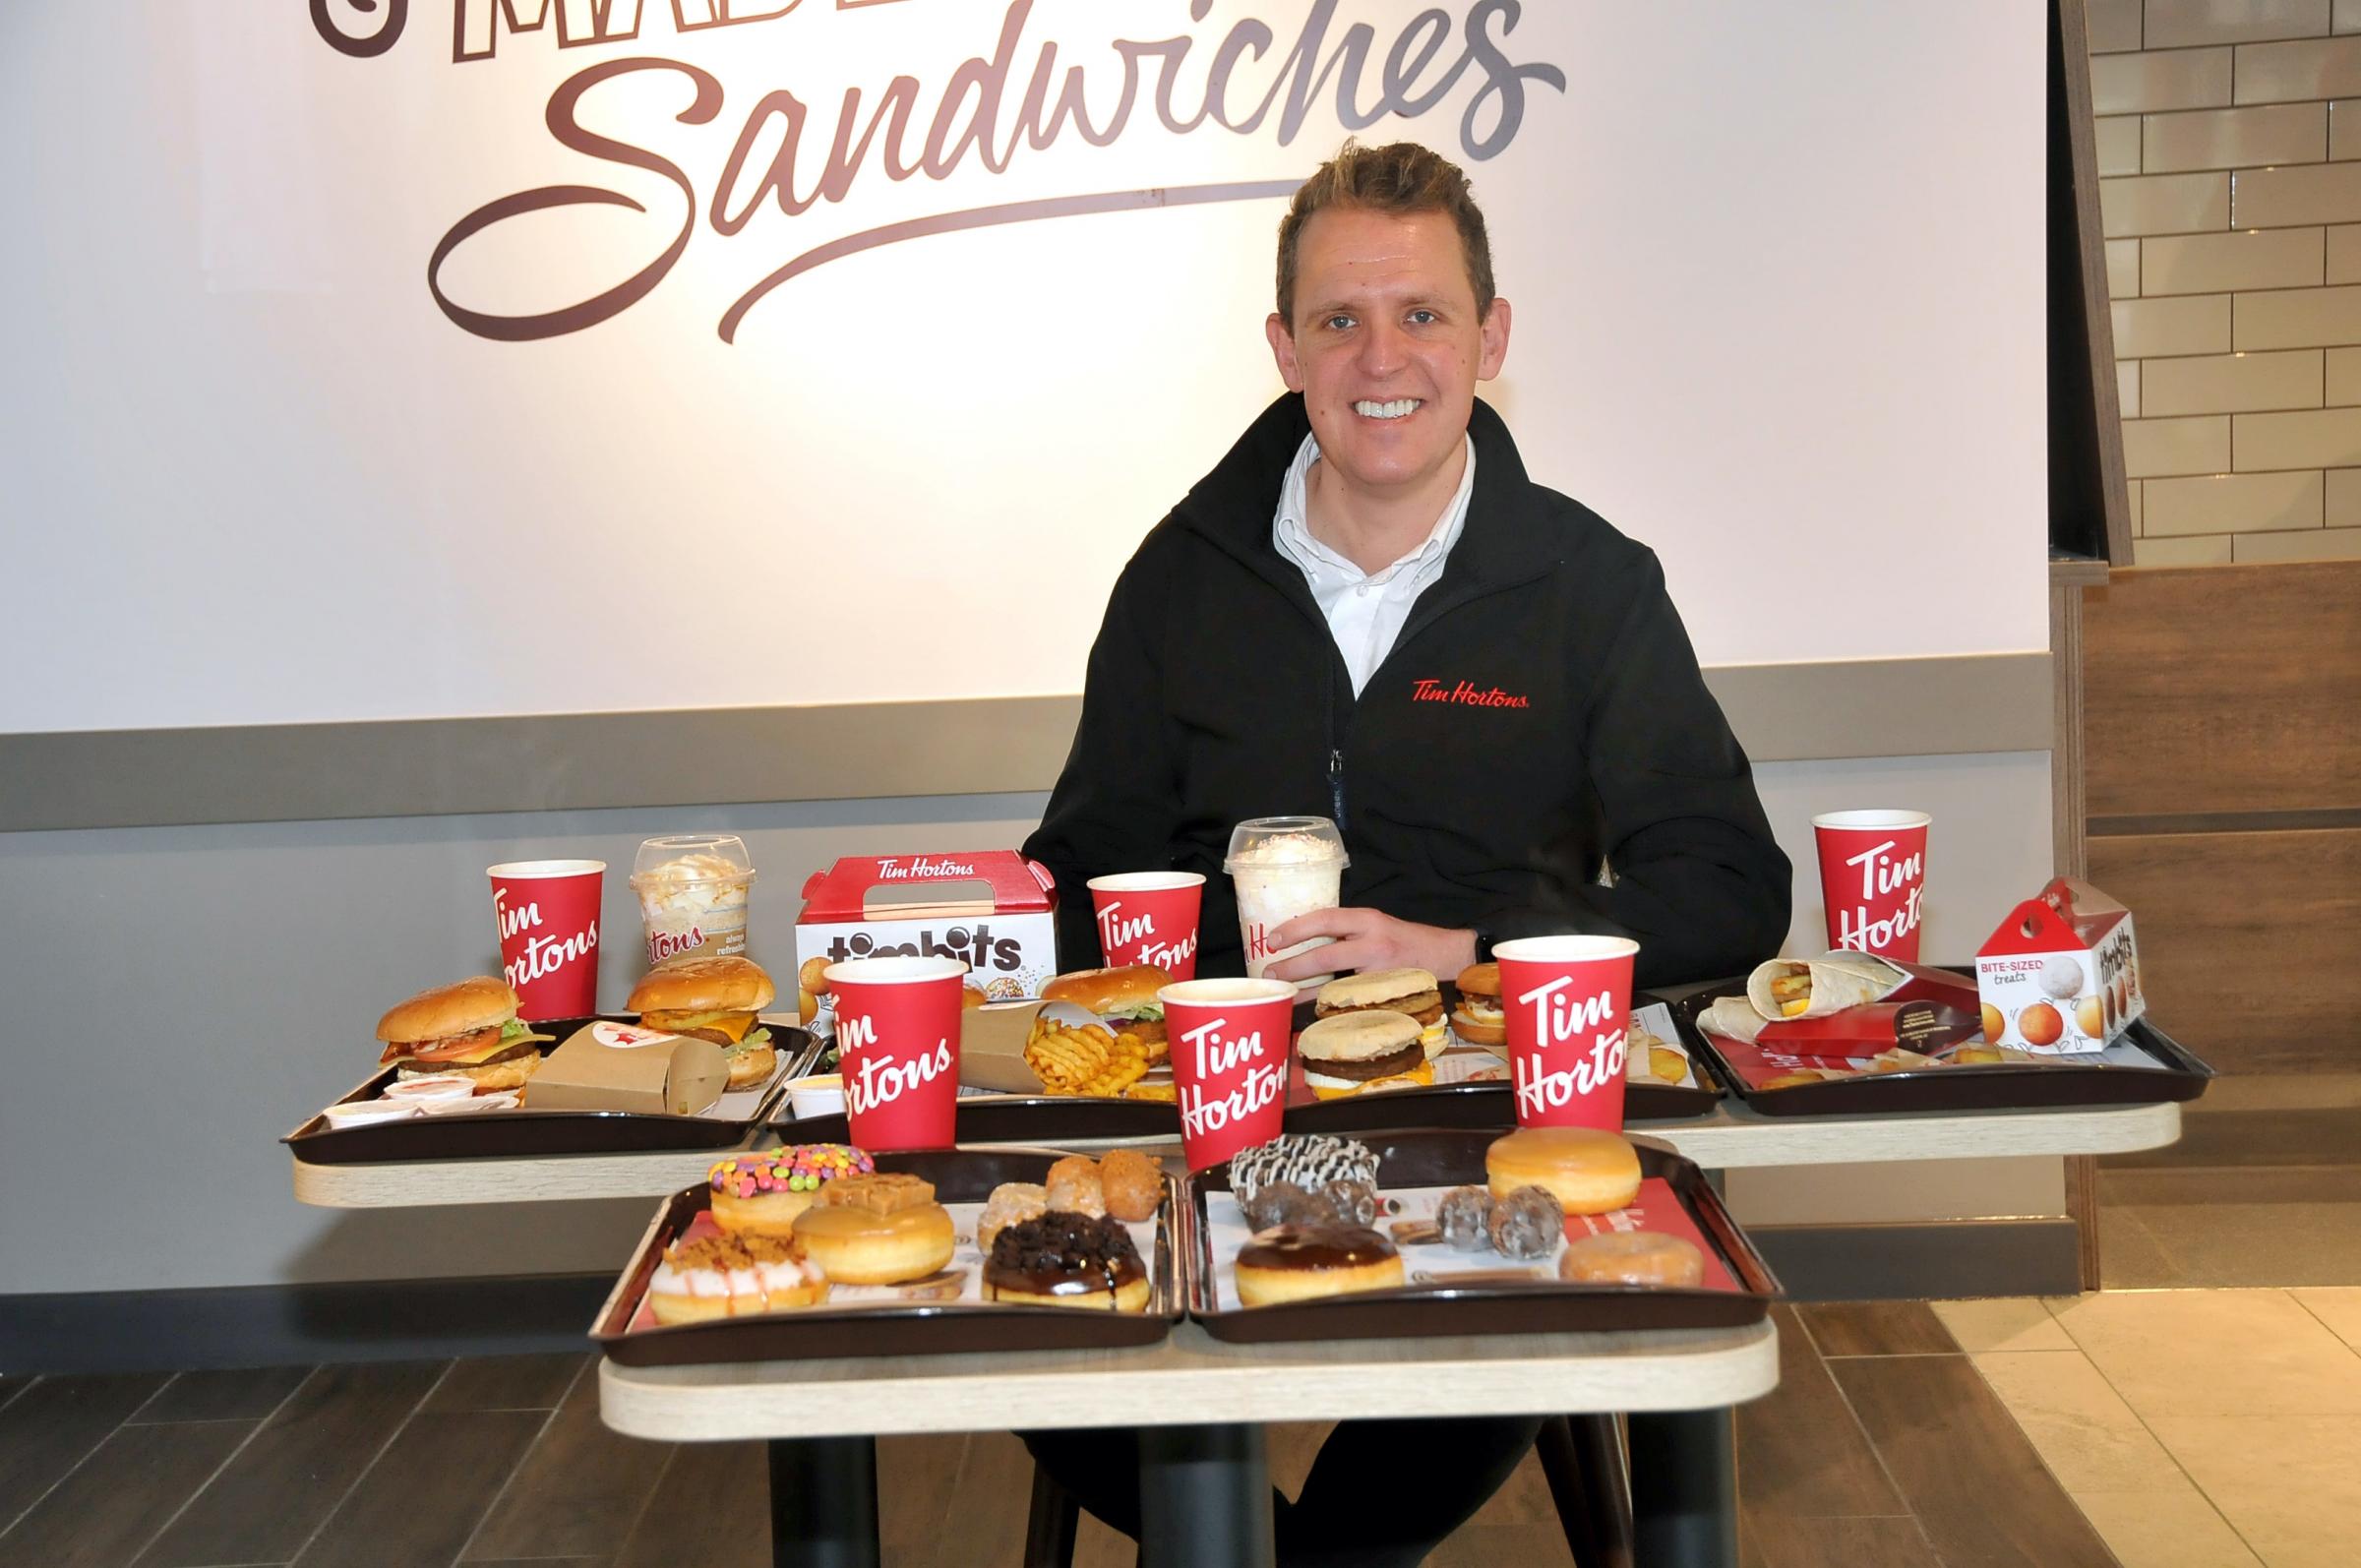 Chief marketing executive Kevin Hydes pictured with some of the food options